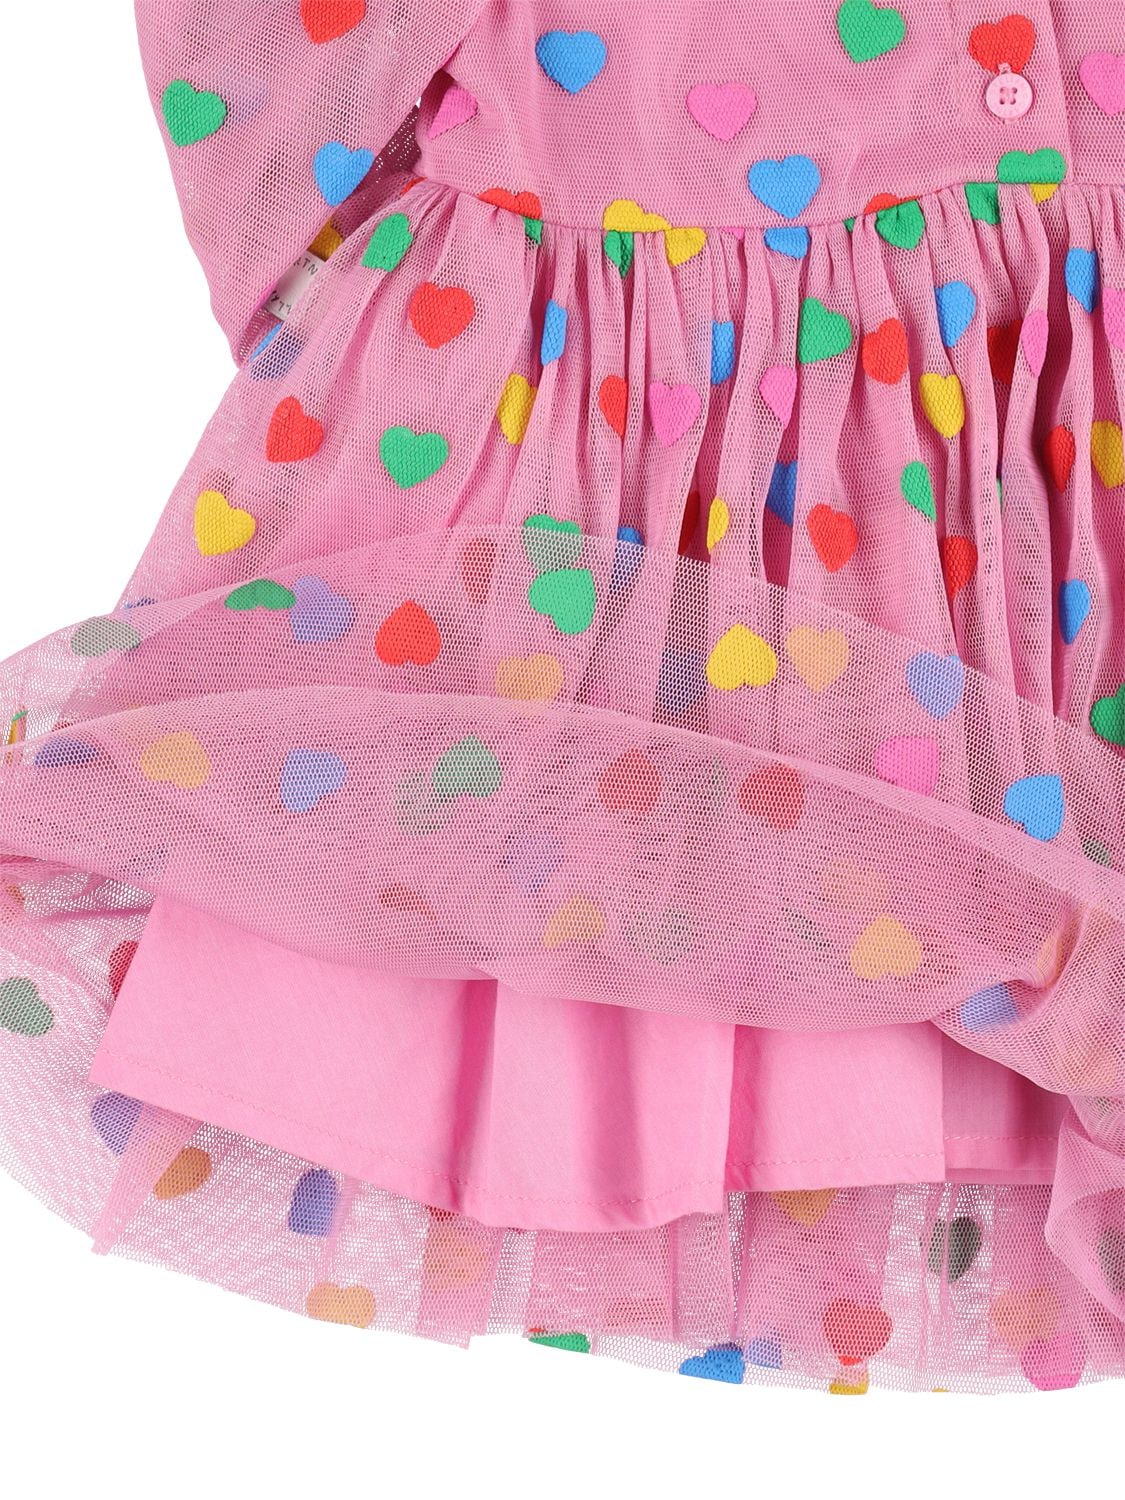 Shop Stella Mccartney Recycled Tulle Dress W/hearts In Pink